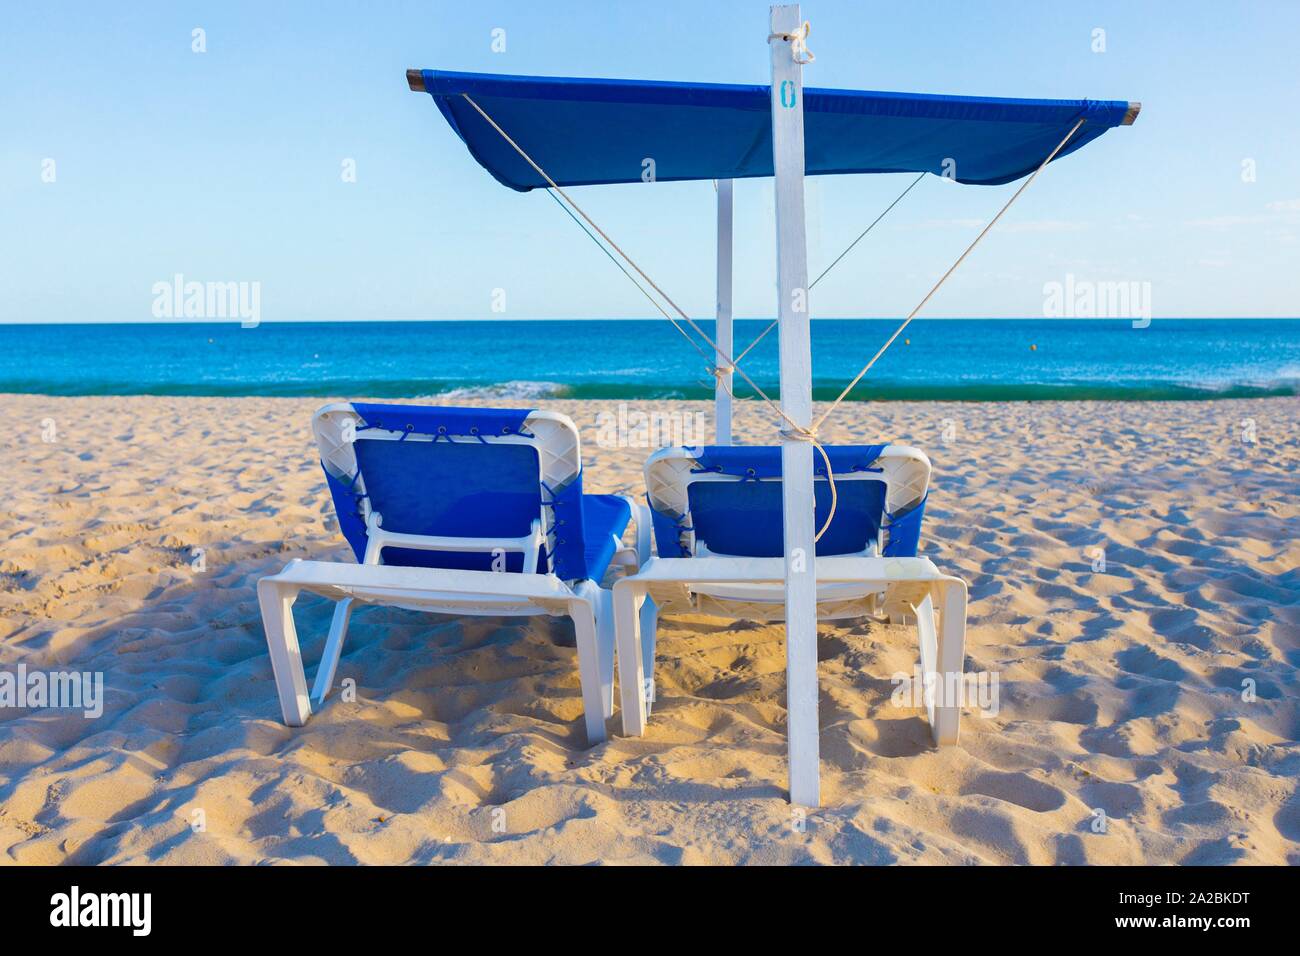 Beach chair with awning structure for sunshade. Beach background. Stock Photo